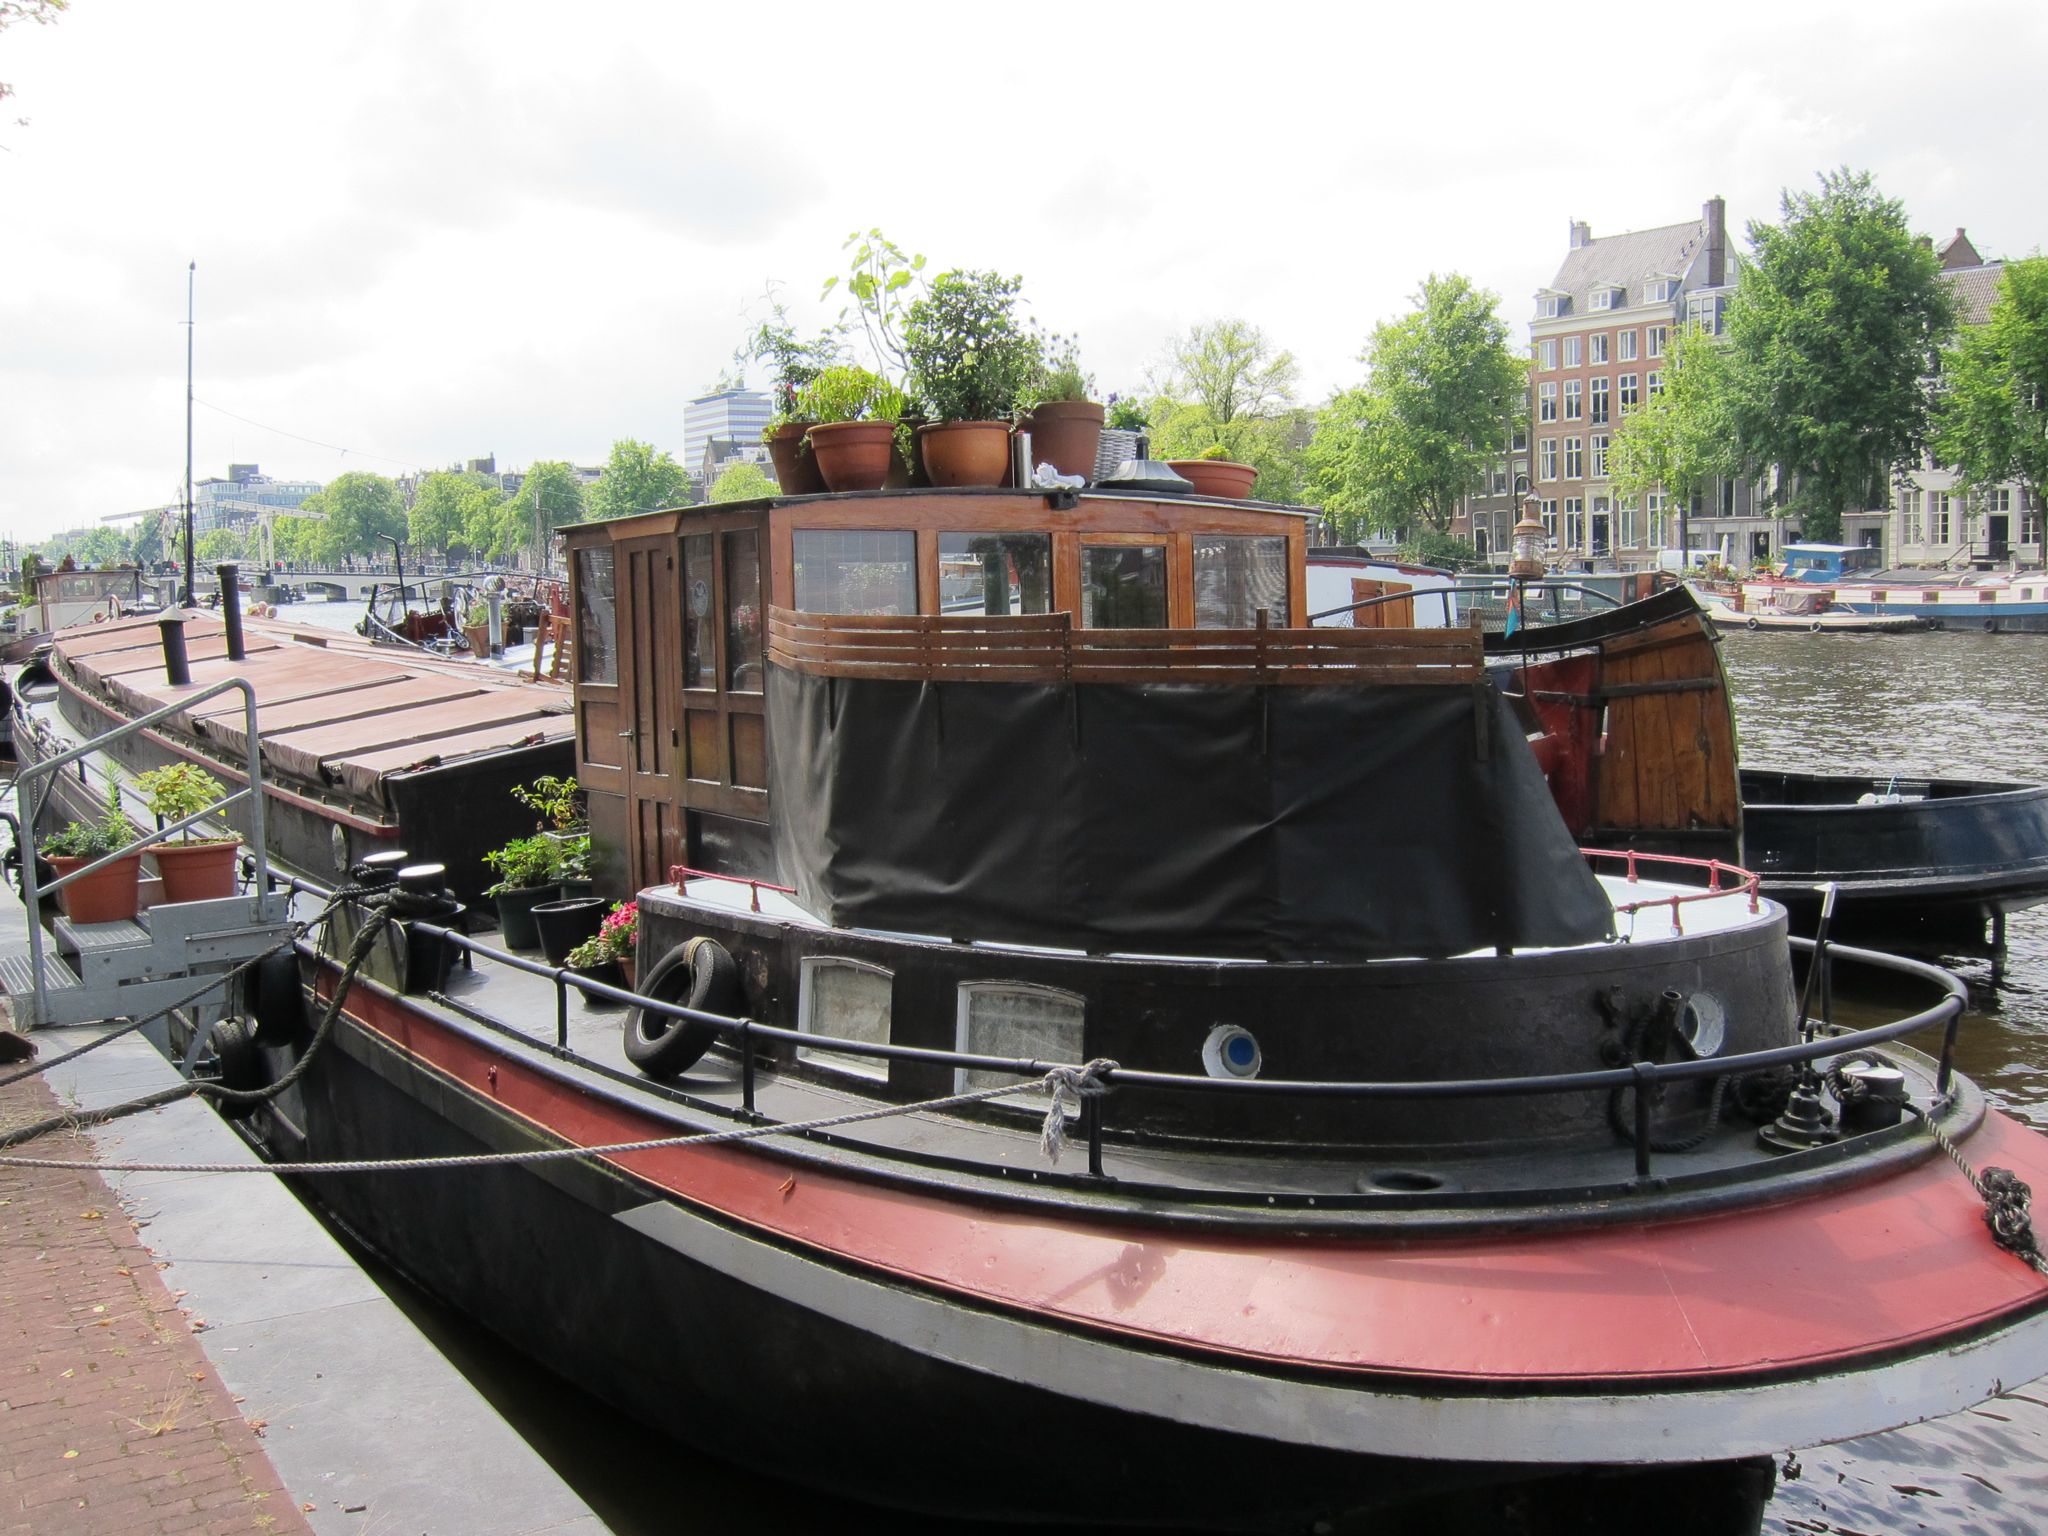 Photo 10 of 90 from the album Highlights Amsterdam 2012.